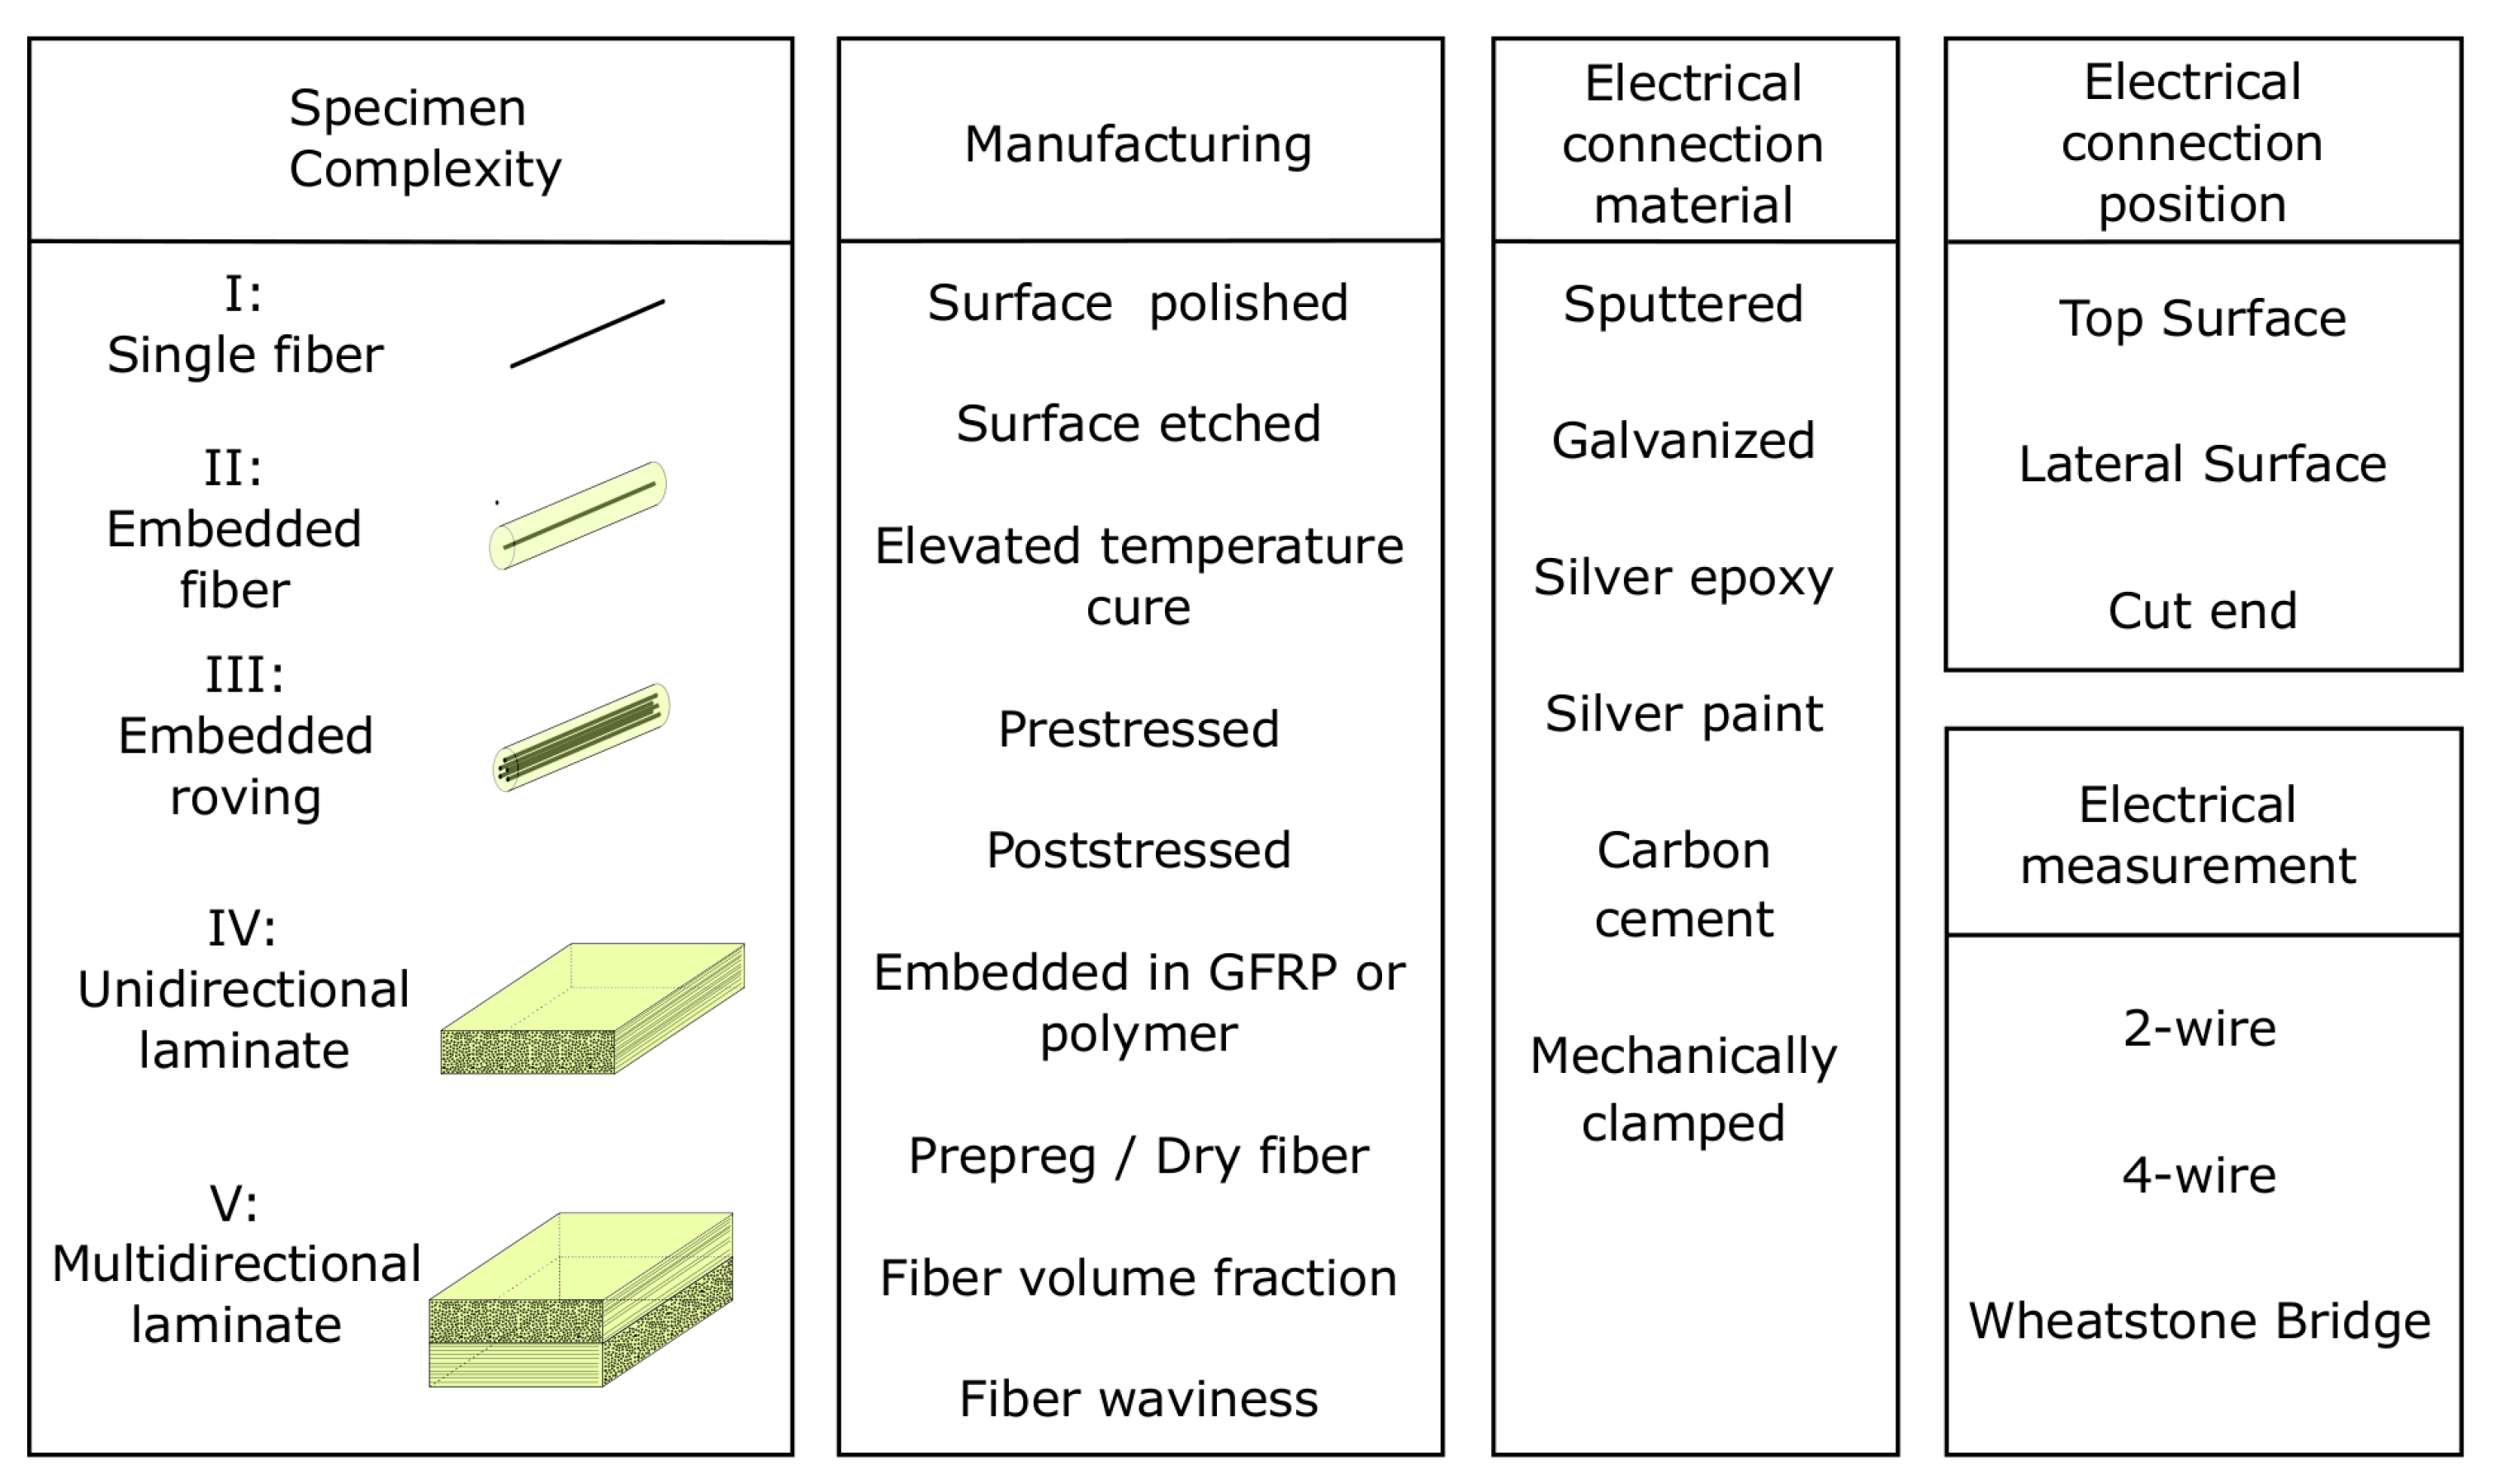 J. Compos. Sci. | Free Full-Text | A Review on the Usage of Continuous Carbon  Fibers for Piezoresistive Self Strain Sensing Fiber Reinforced Plastics